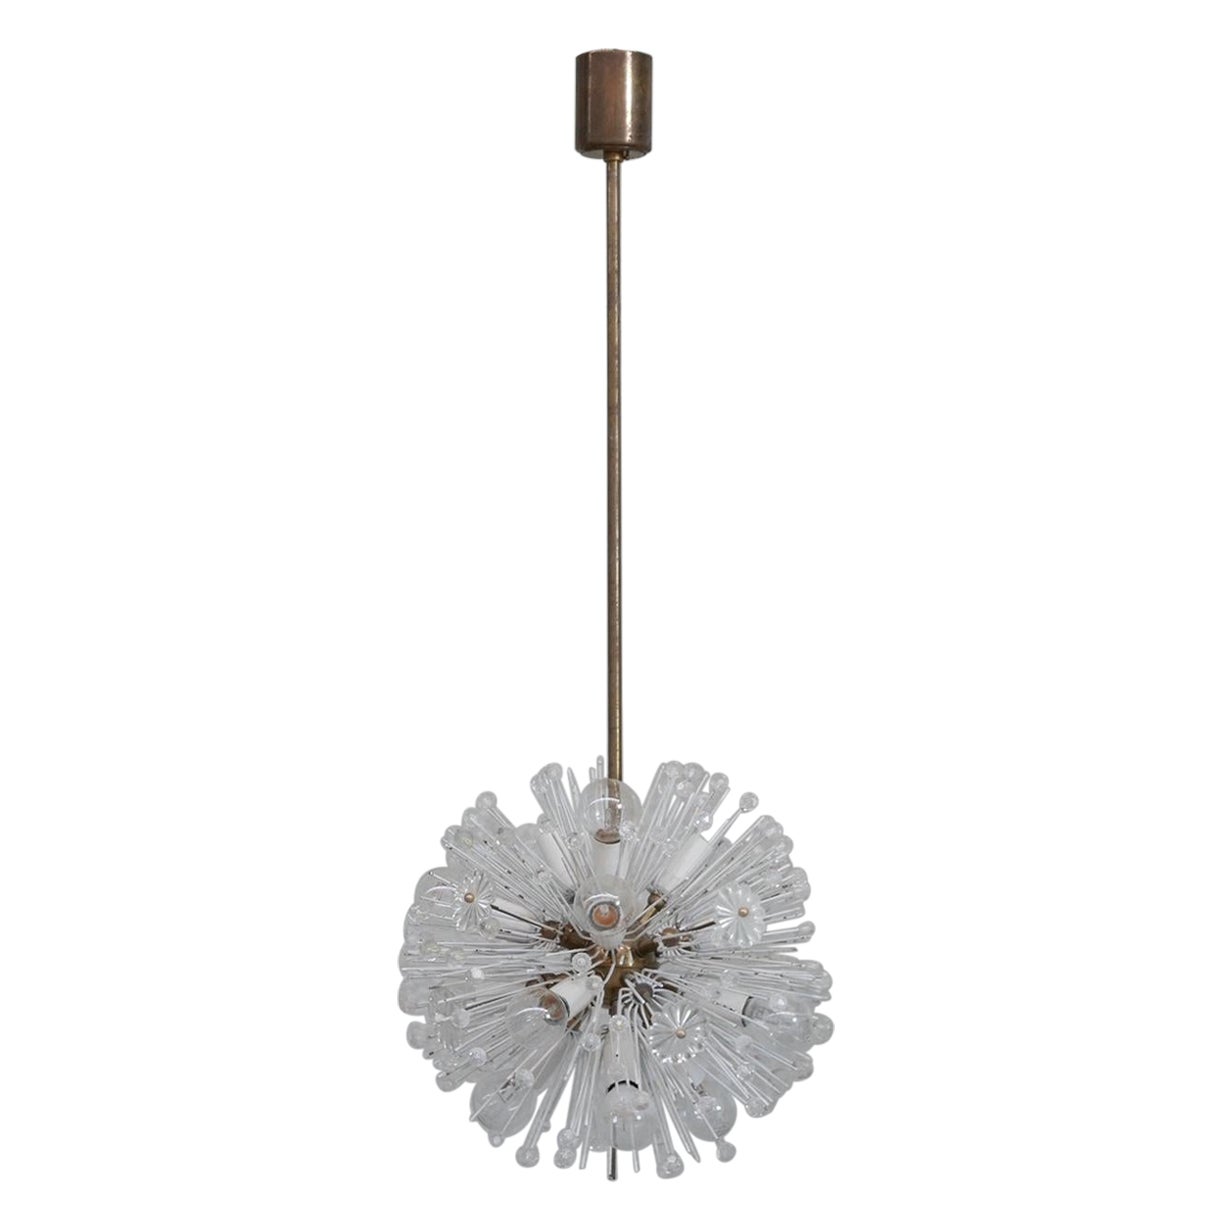 Austrian Mid-Century Glass and Brass Chandelier Pendant by Emil Stejnar For Sale